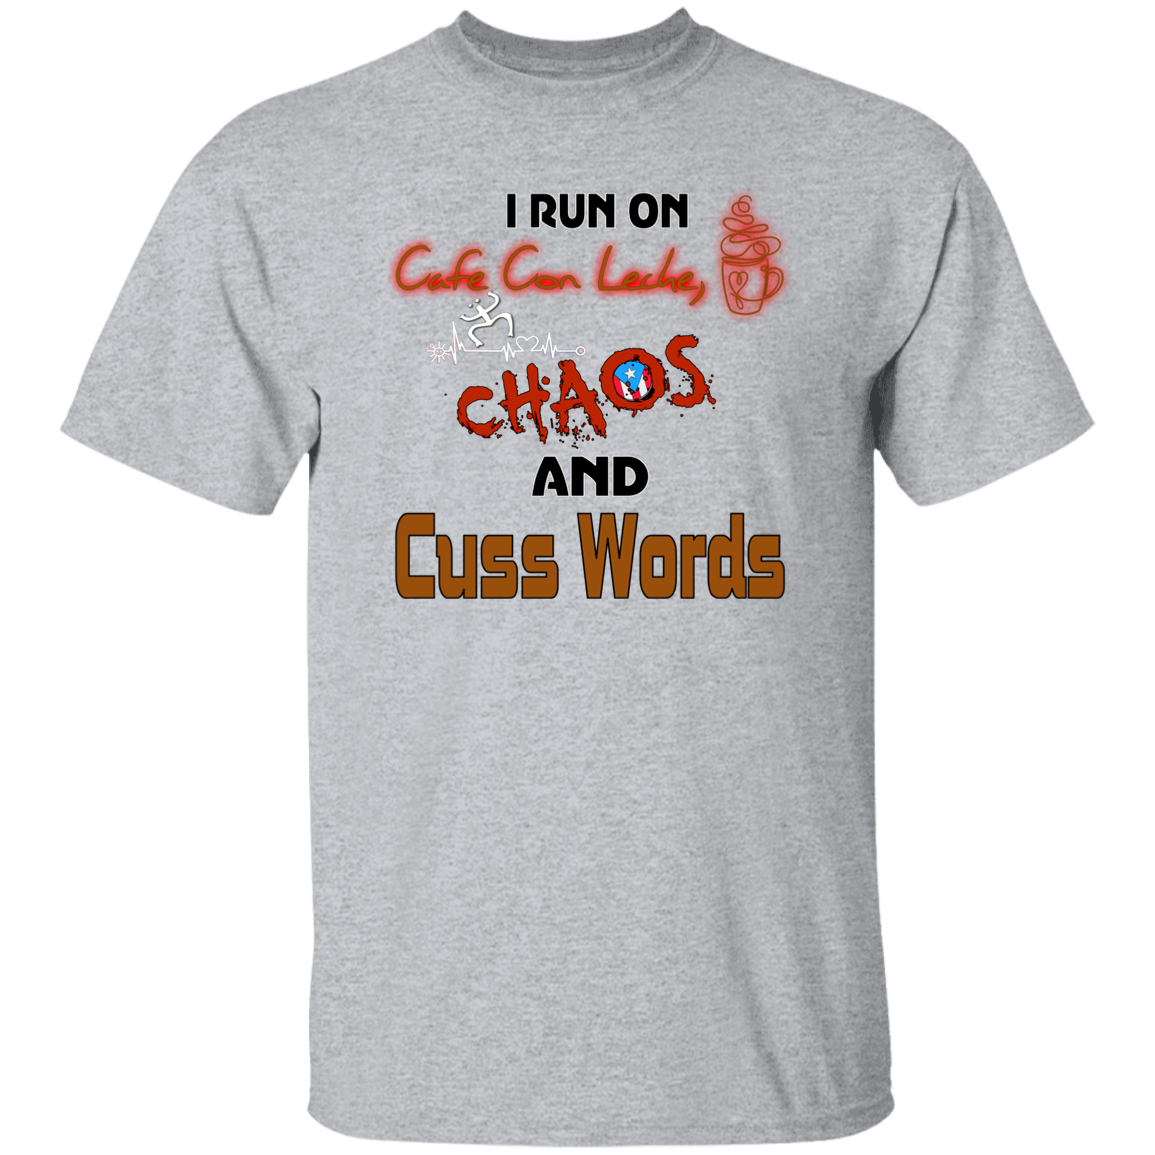 Cafe Con Leche, Chaos and Cuss Words 5.3 oz. T-Shirt